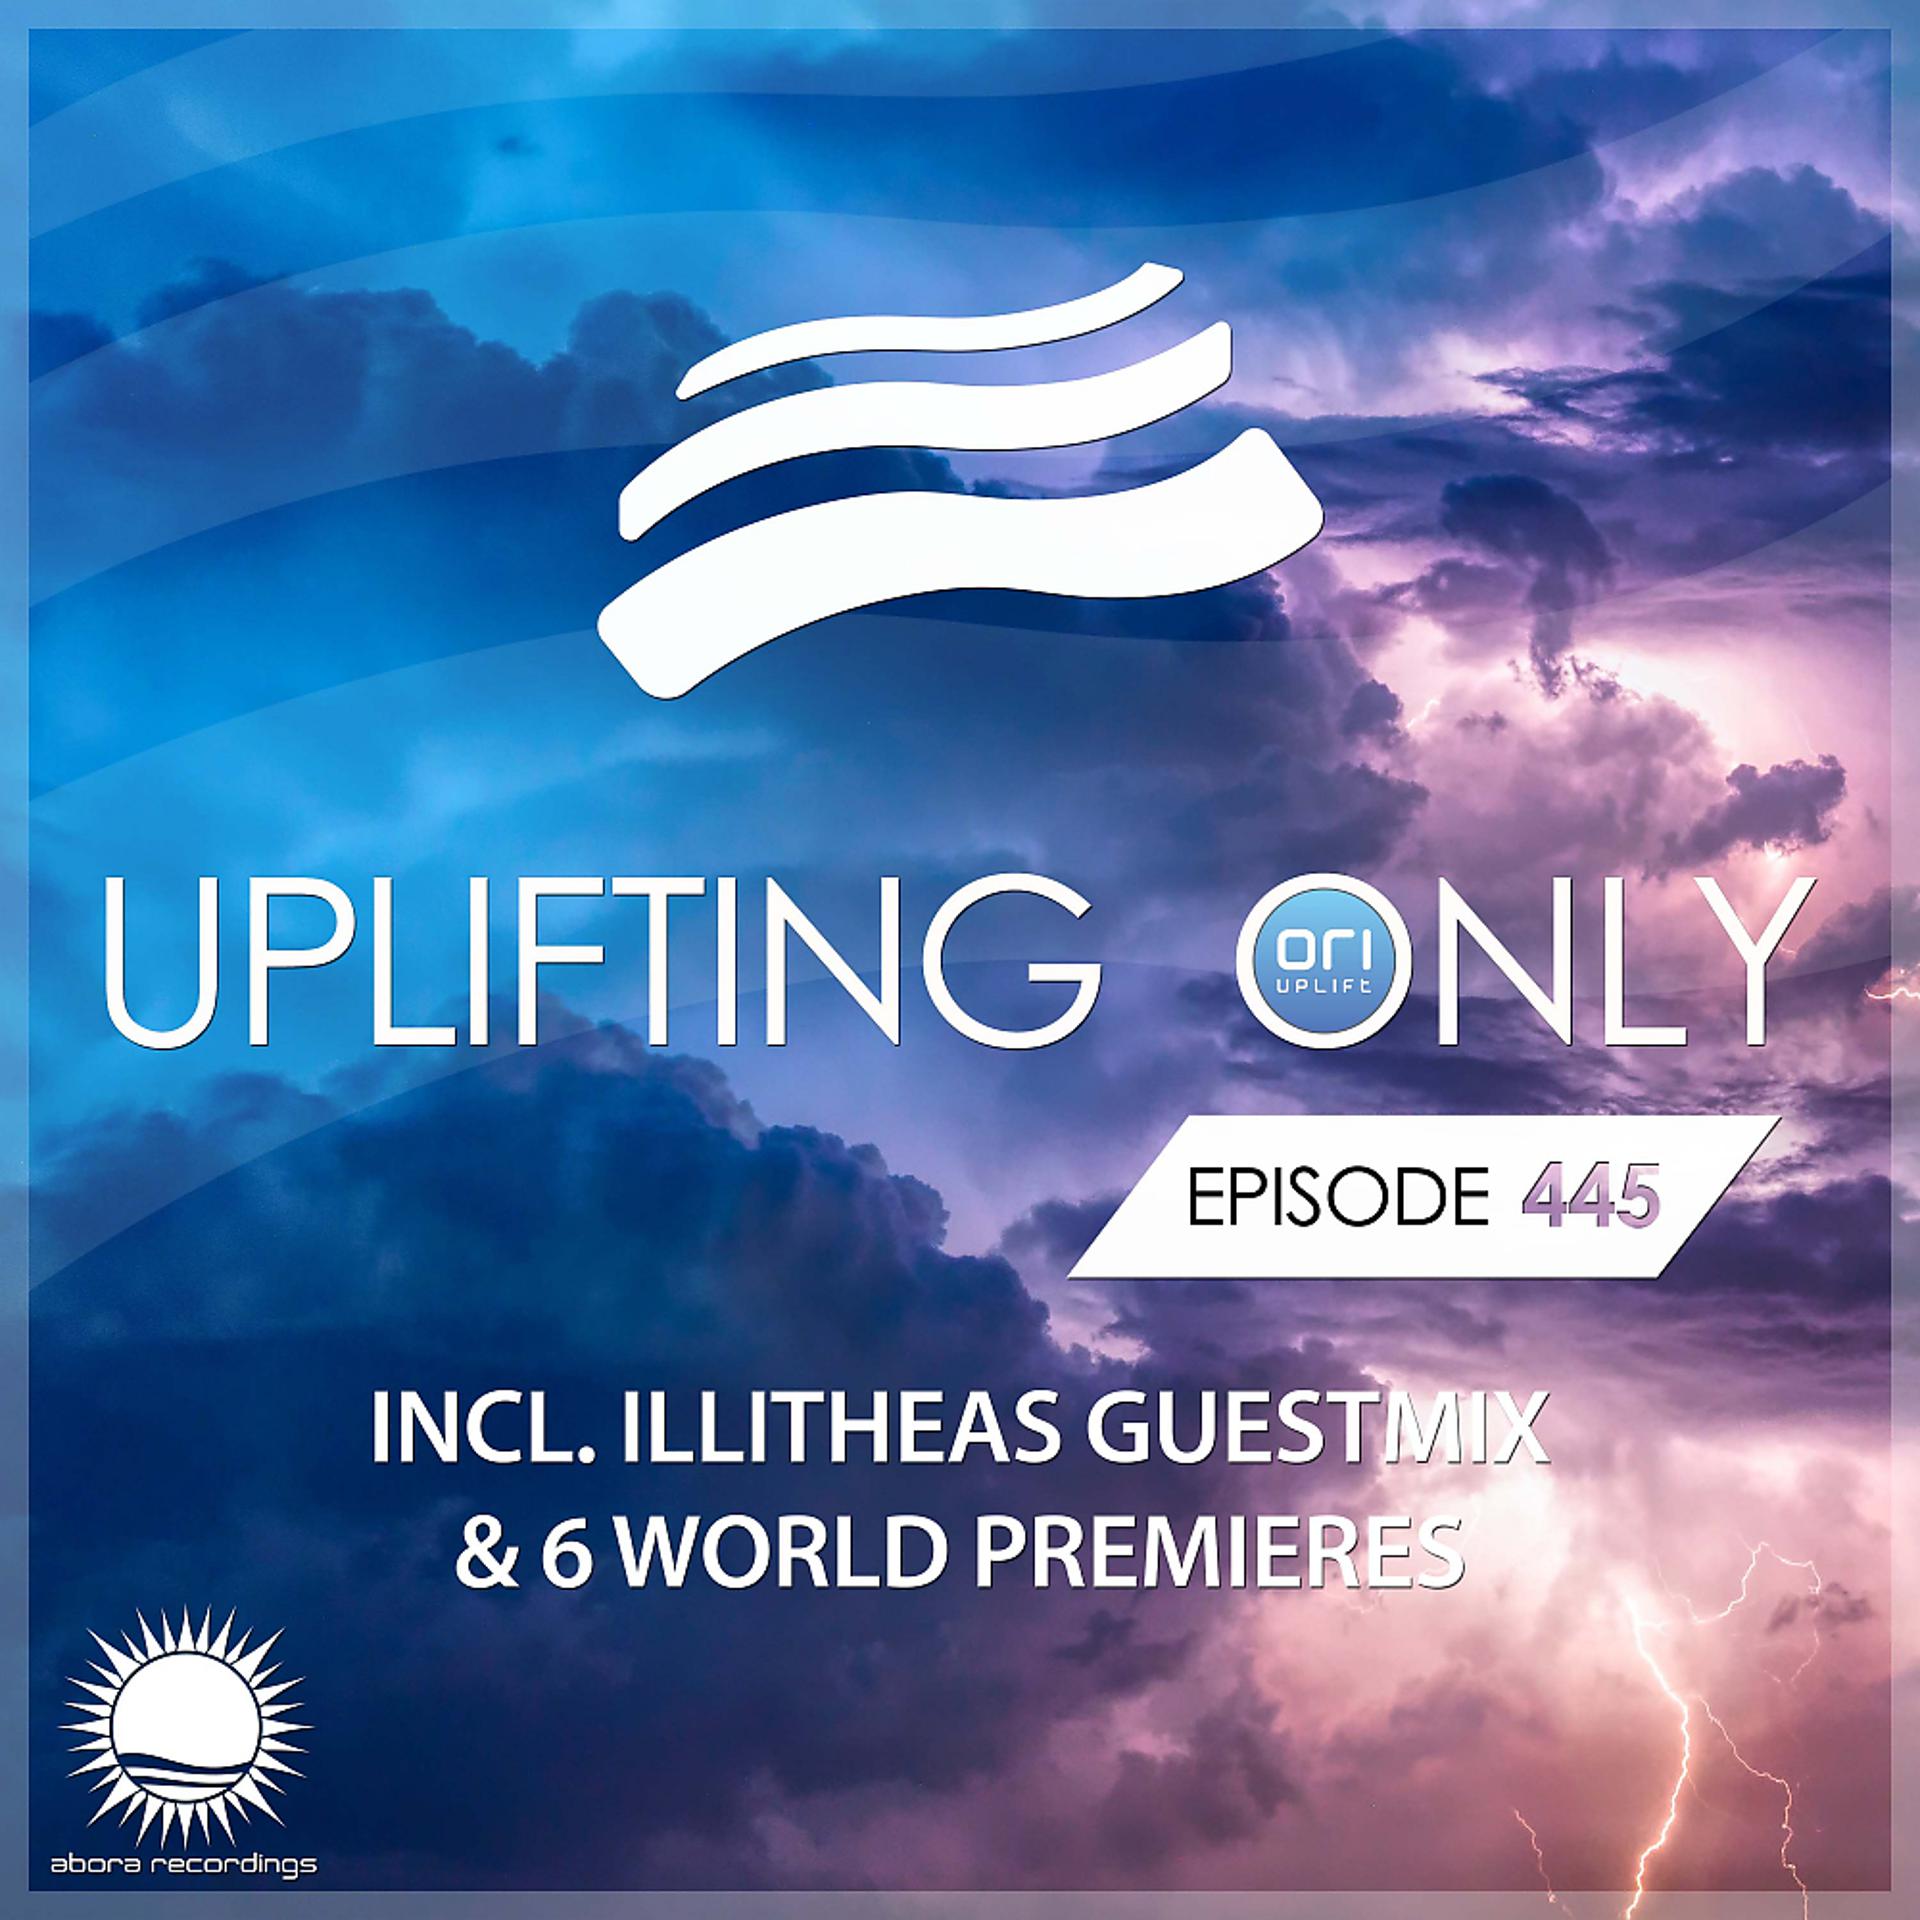 Постер альбома Uplifting Only Episode 445 (incl. illitheas Album Special Guestmix) (Aug 2021) [FULL]